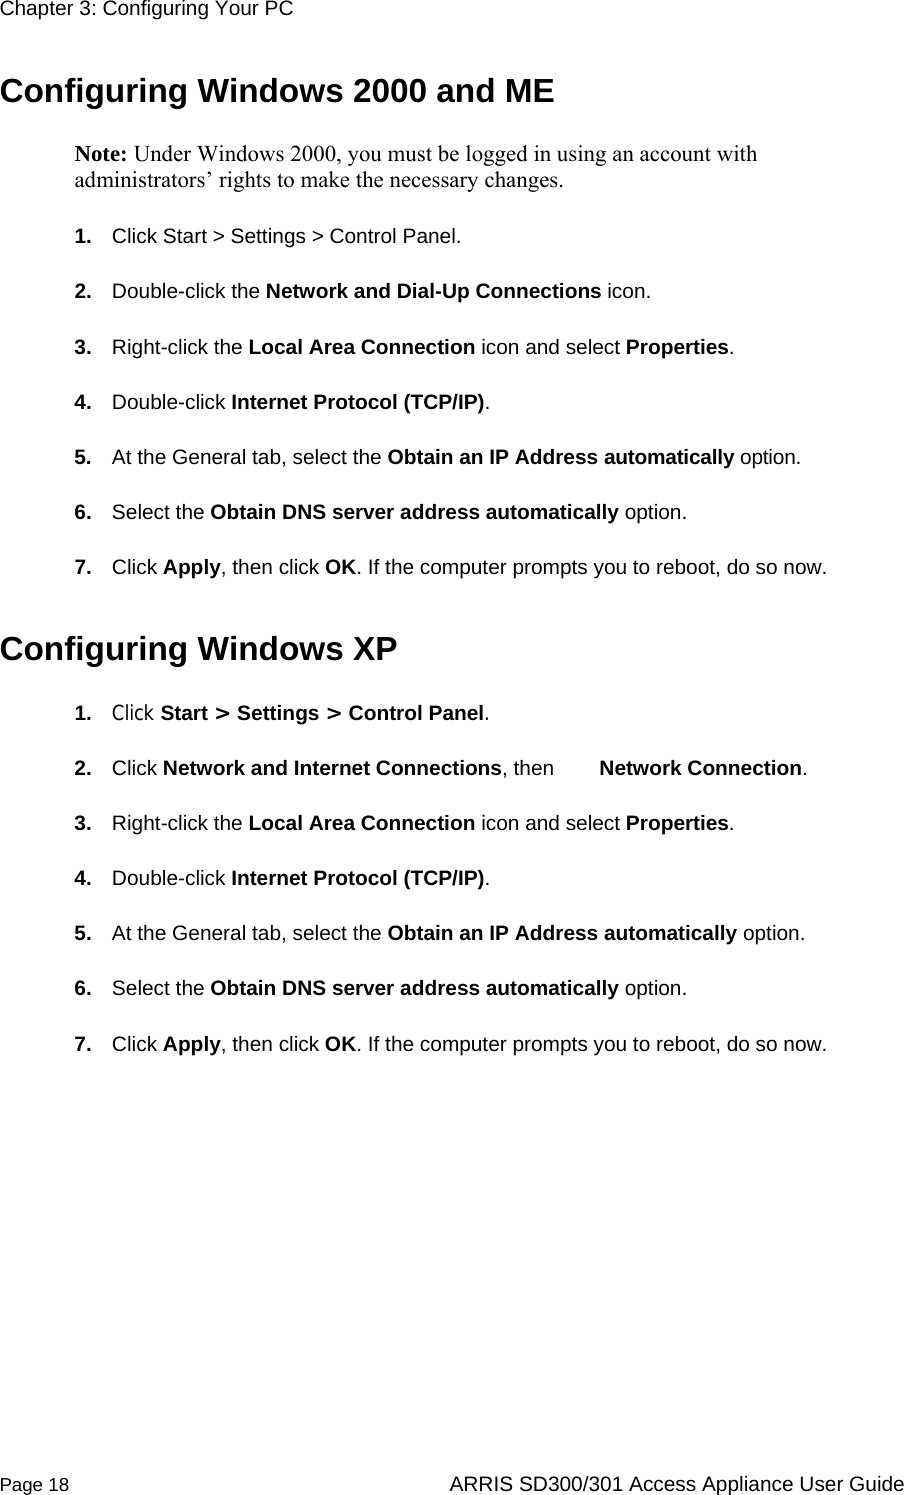 Chapter 3: Configuring Your PC  Page 18  ARRIS SD300/301 Access Appliance User Guide Configuring Windows 2000 and ME Note: Under Windows 2000, you must be logged in using an account with administrators’ rights to make the necessary changes. 1.  Click Start &gt; Settings &gt; Control Panel.  2.  Double-click the Network and Dial-Up Connections icon.  3.  Right-click the Local Area Connection icon and select Properties.  4.  Double-click Internet Protocol (TCP/IP).  5.  At the General tab, select the Obtain an IP Address automatically option.  6.  Select the Obtain DNS server address automatically option.  7.  Click Apply, then click OK. If the computer prompts you to reboot, do so now.  Configuring Windows XP 1.  Click Start &gt; Settings &gt; Control Panel.  2.  Click Network and Internet Connections, then   Network Connection.  3.  Right-click the Local Area Connection icon and select Properties.  4.  Double-click Internet Protocol (TCP/IP).  5.  At the General tab, select the Obtain an IP Address automatically option.  6.  Select the Obtain DNS server address automatically option.  7.  Click Apply, then click OK. If the computer prompts you to reboot, do so now.   